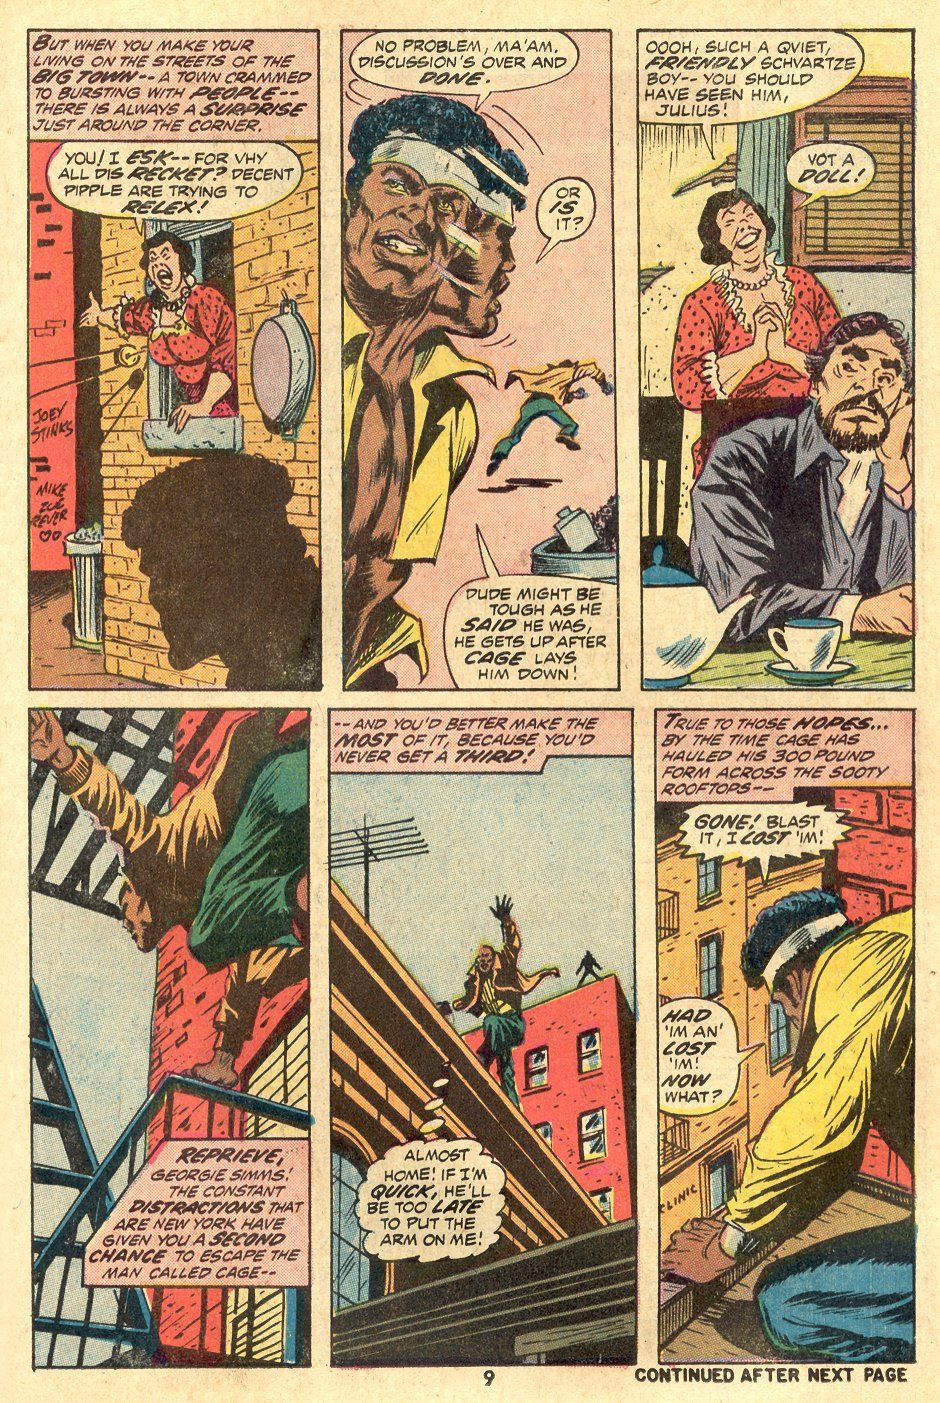 A Jewish couple sees Luke Cage fighting some bad guys, an inadvertent slur is used